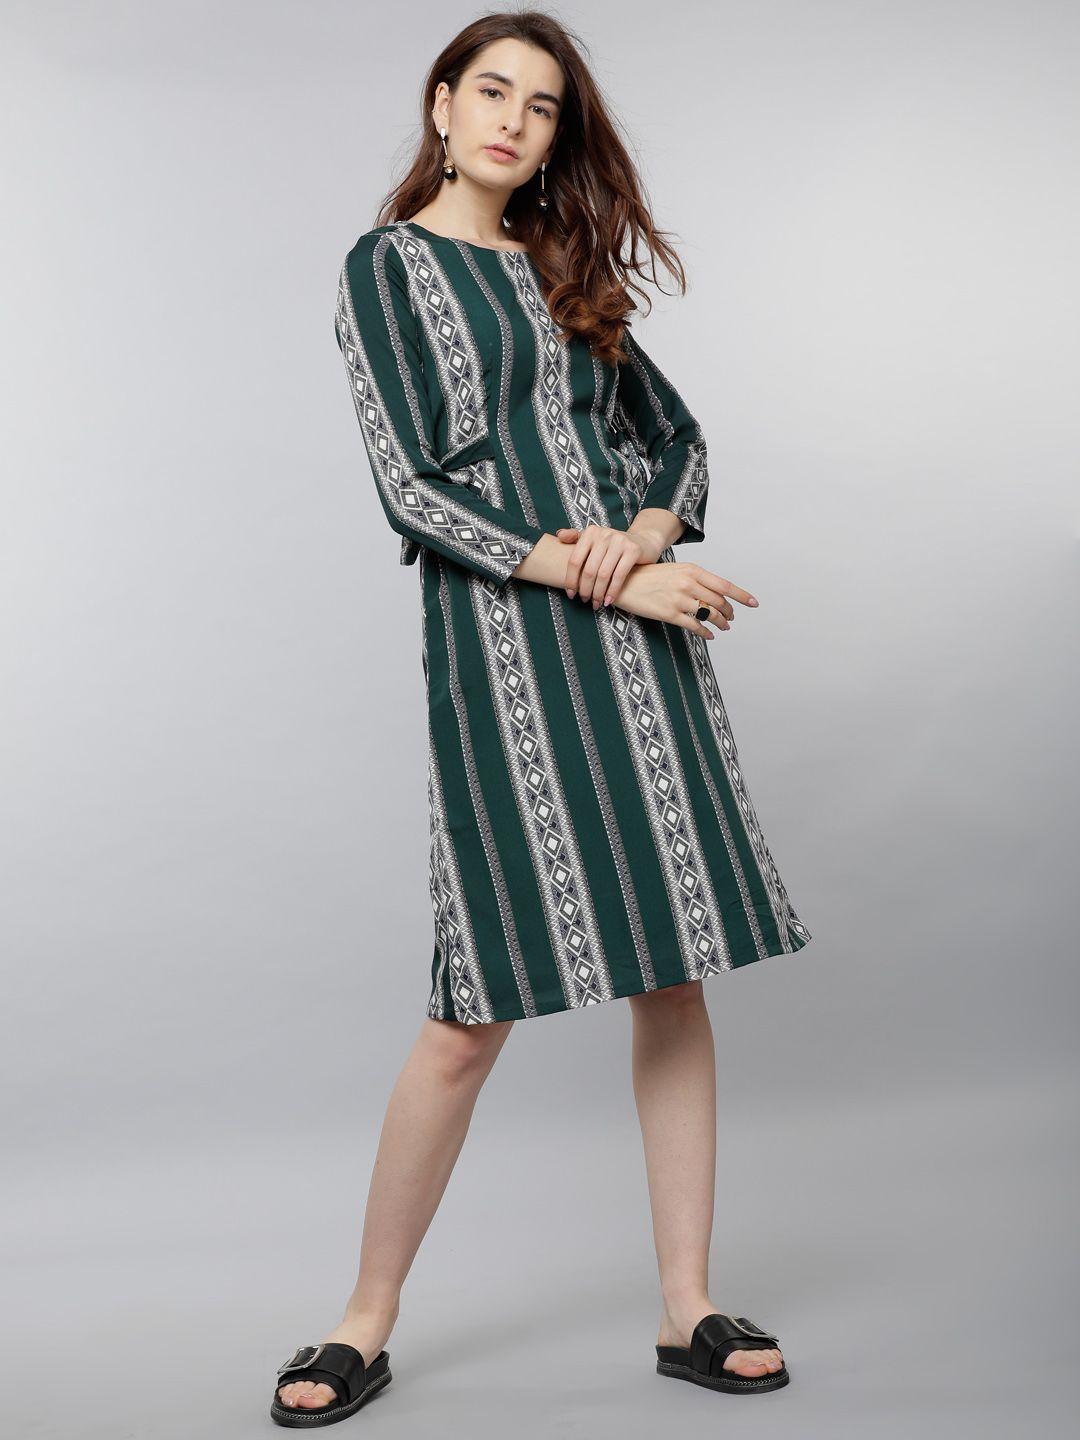 tokyo talkies women green printed fit and flare dress